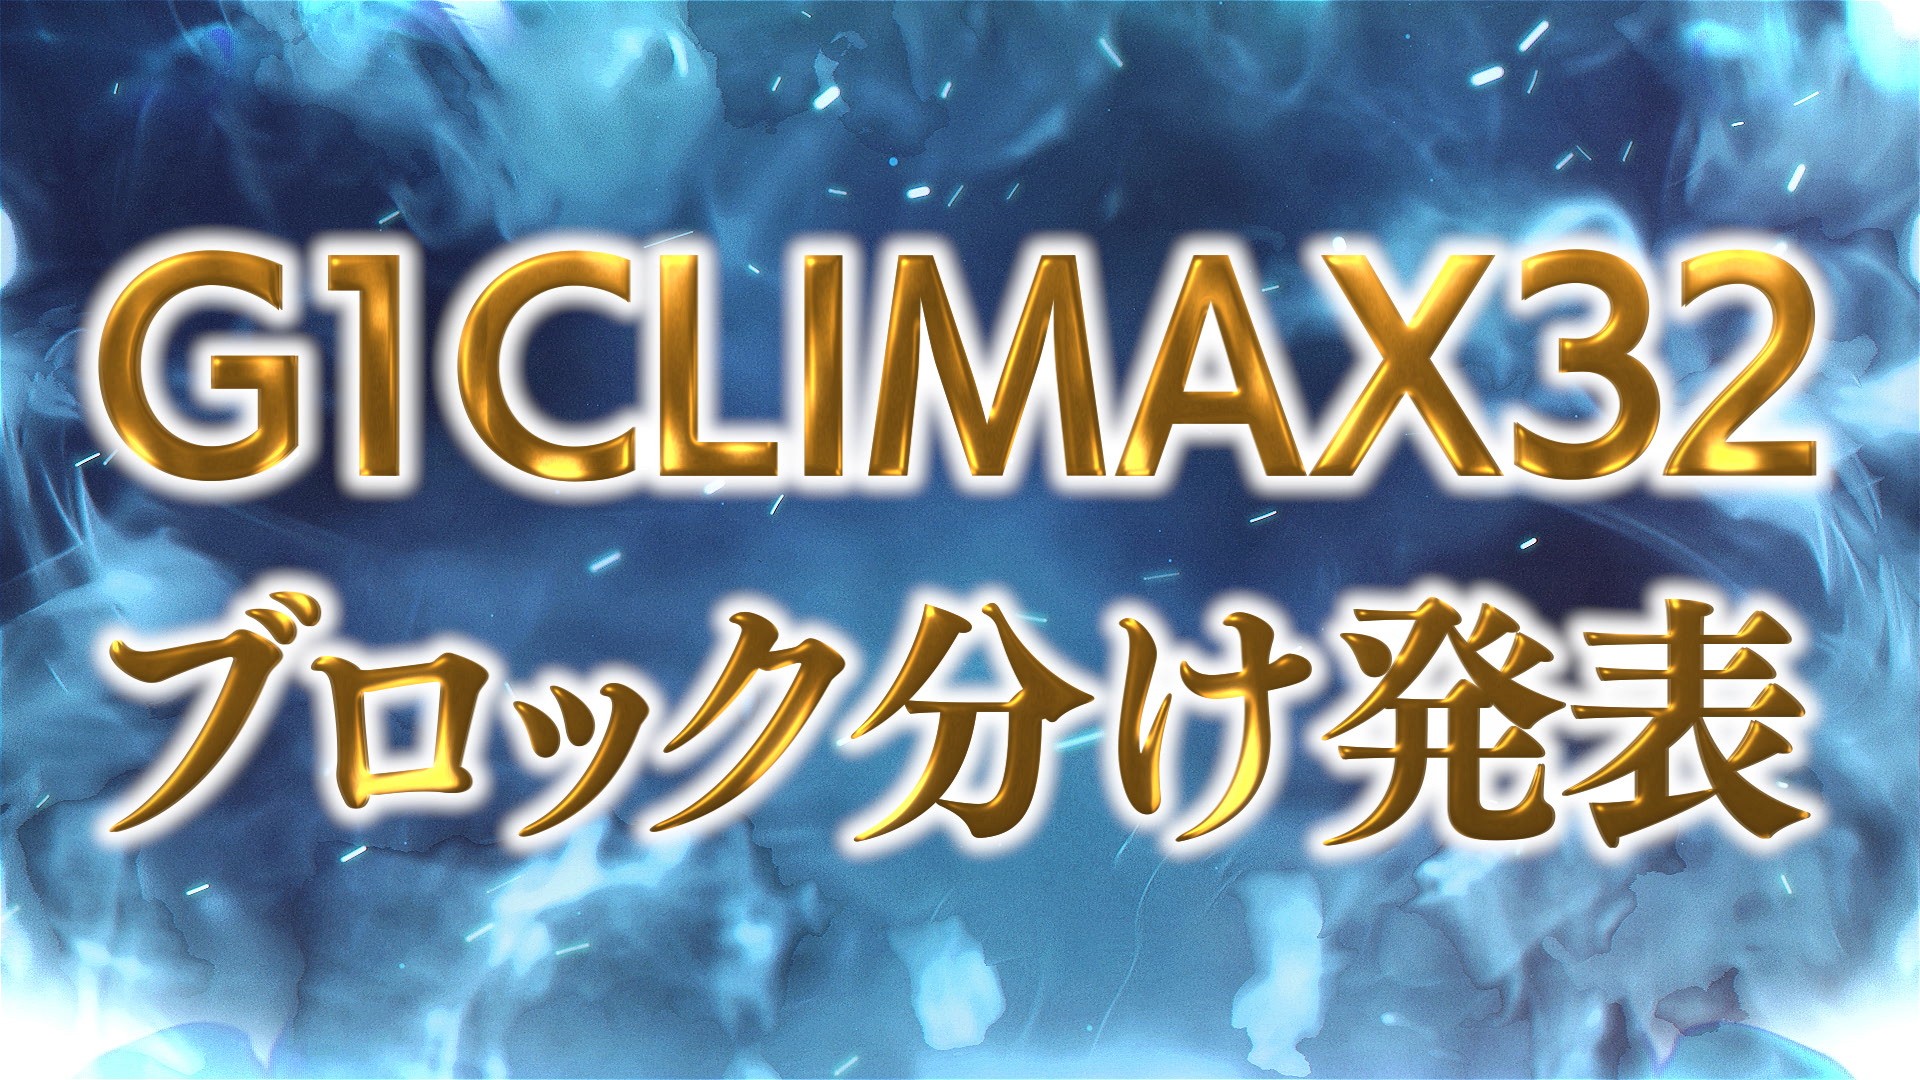 G1 Climax 2022